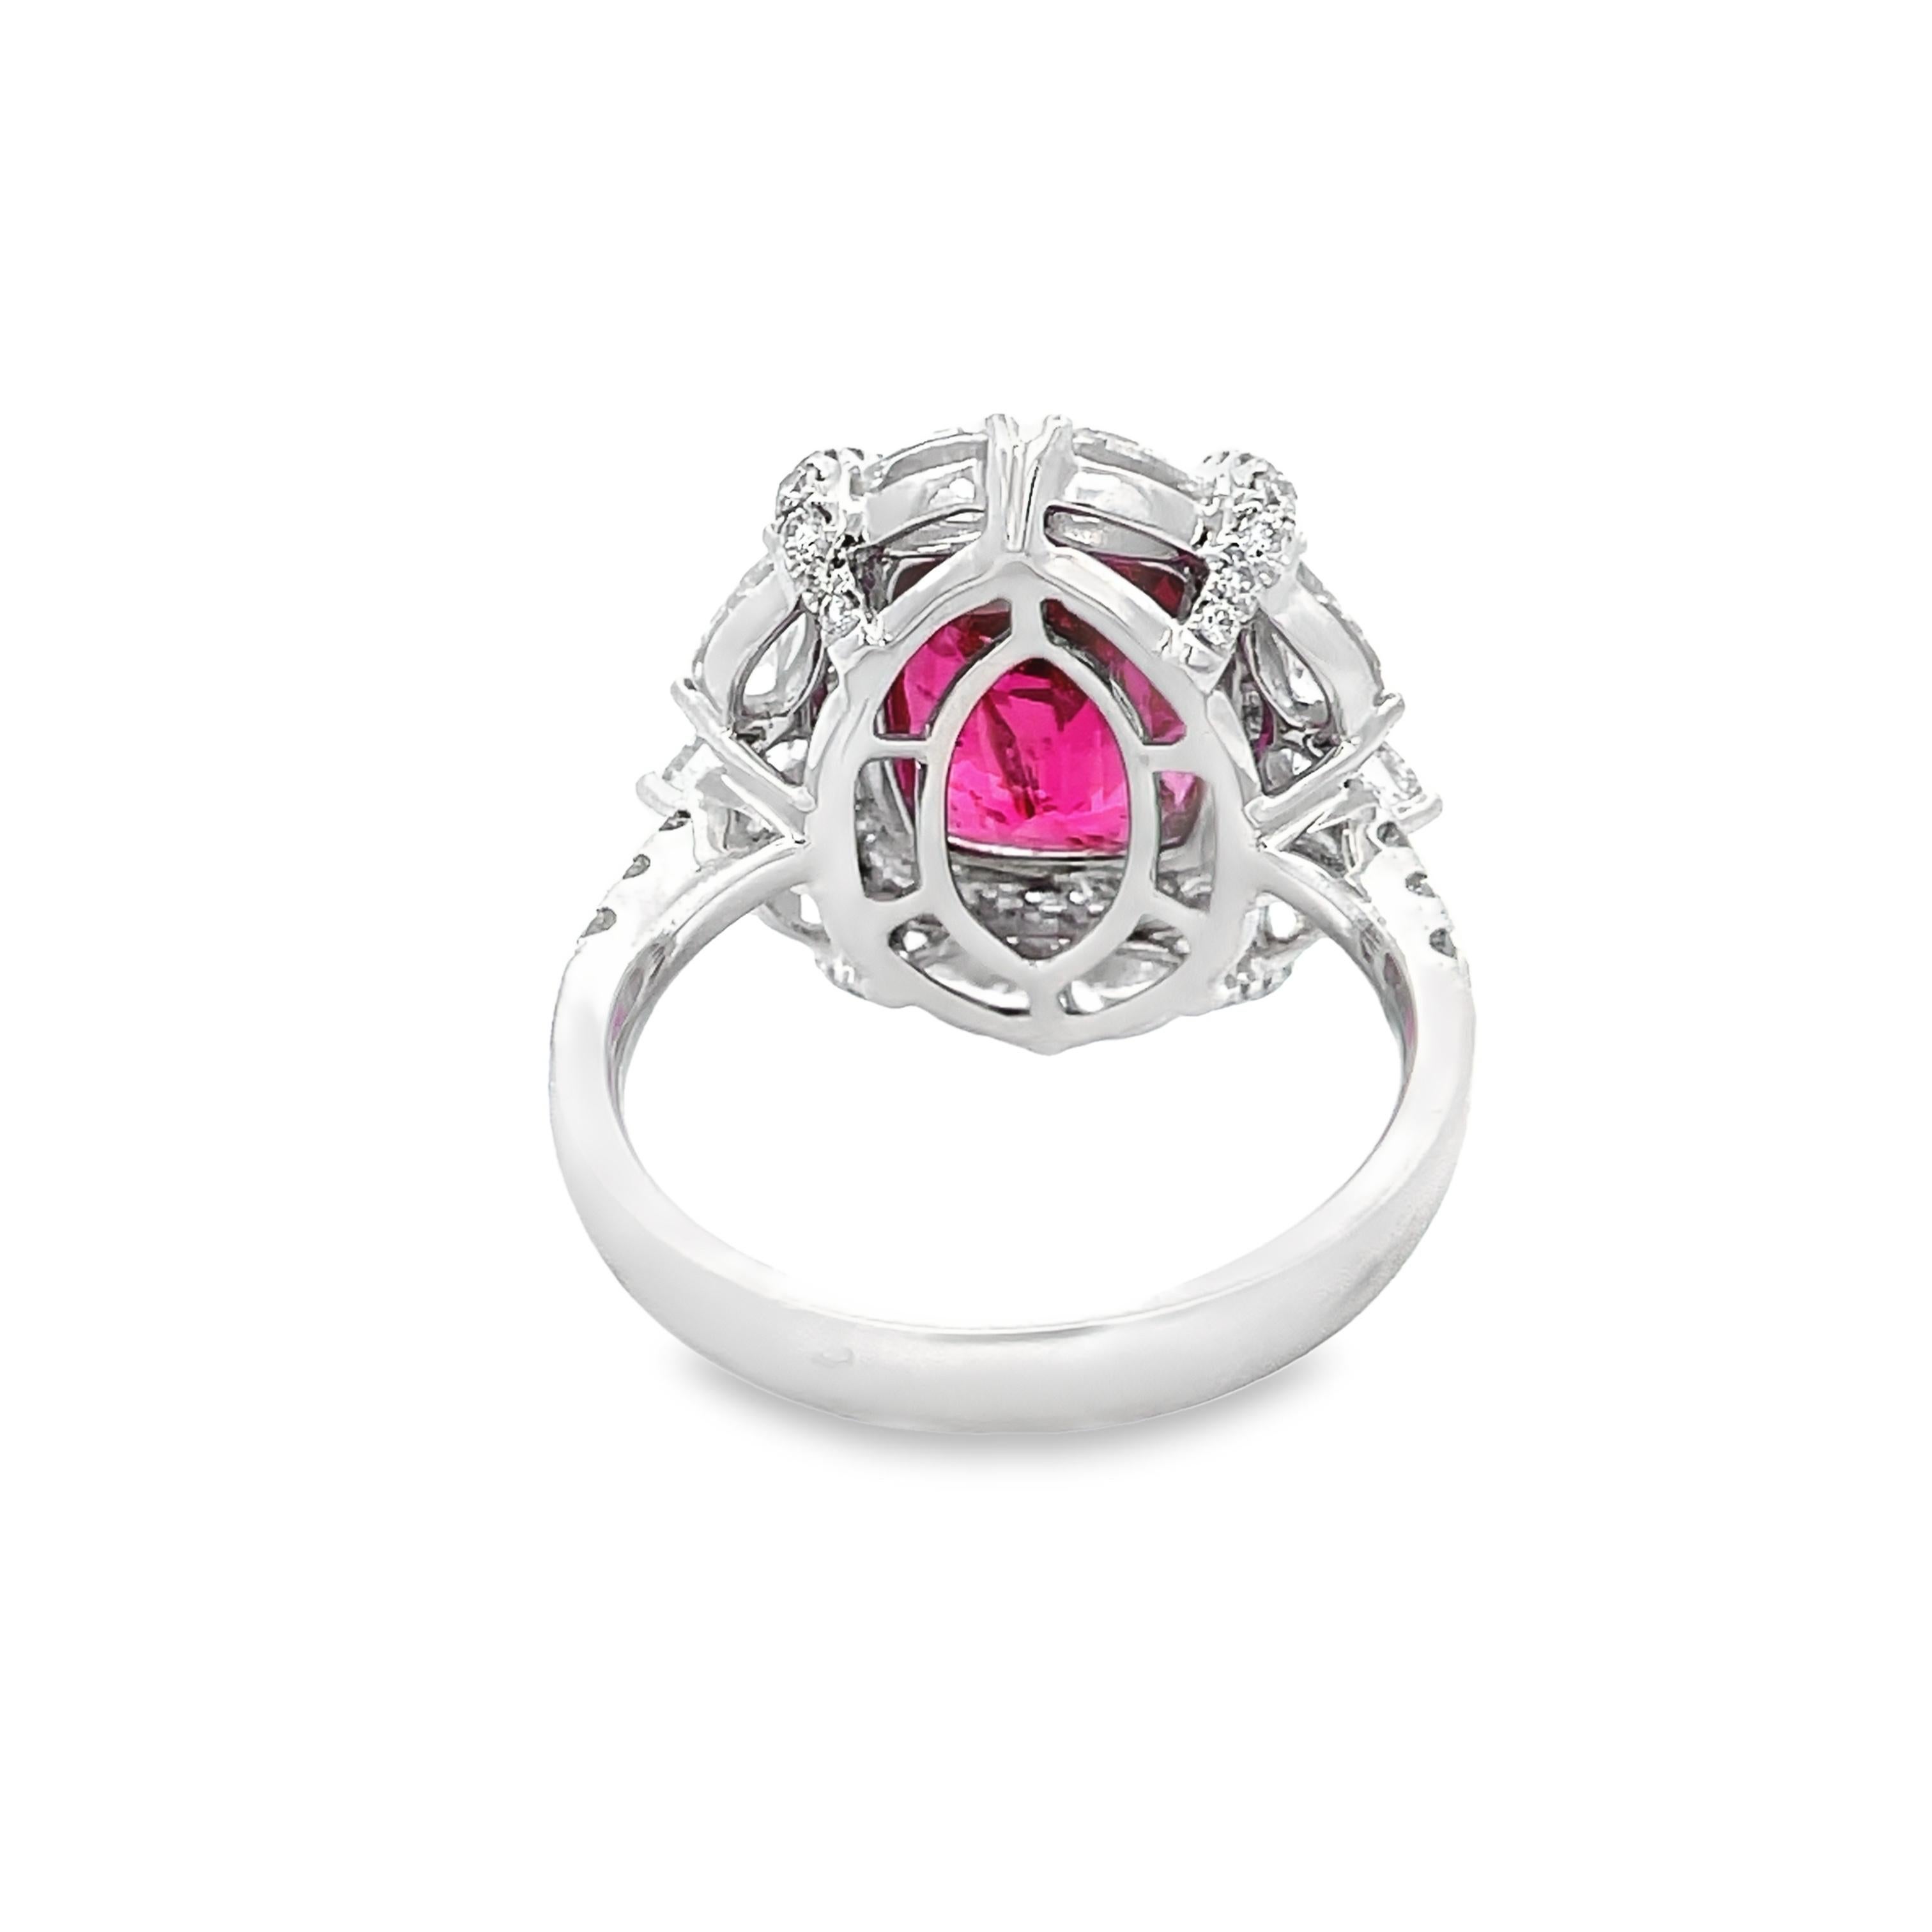 Discover unparalleled beauty with our AGL certified 6.07 carat pink sapphire cushion and 2.23 carat white diamond (mixed shape) 18KW ring. This exquisite piece captures attention with its vibrant pink sapphire centerpiece, certified by AGL for